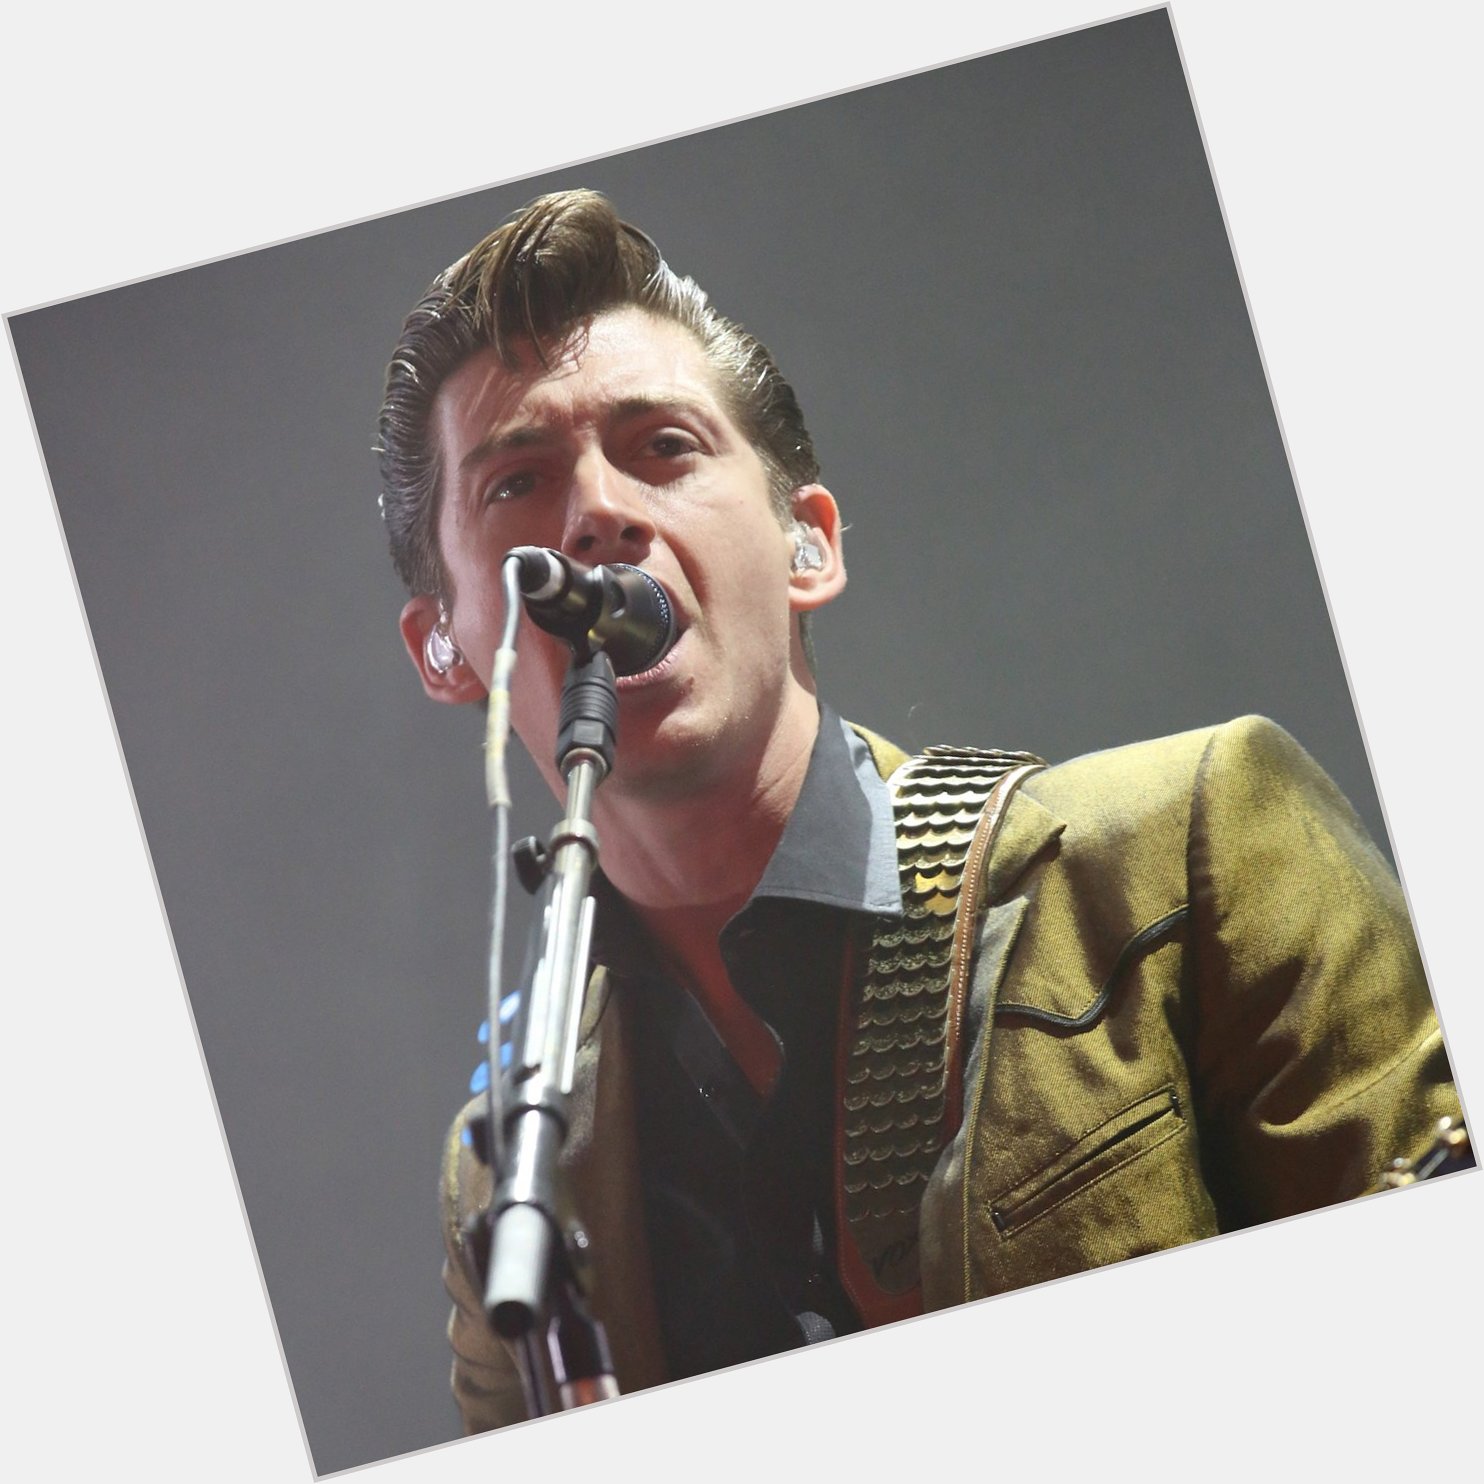 Happy Birthday Alex Turner! 

We hope it\s as epic as your 2014 opening performance!  